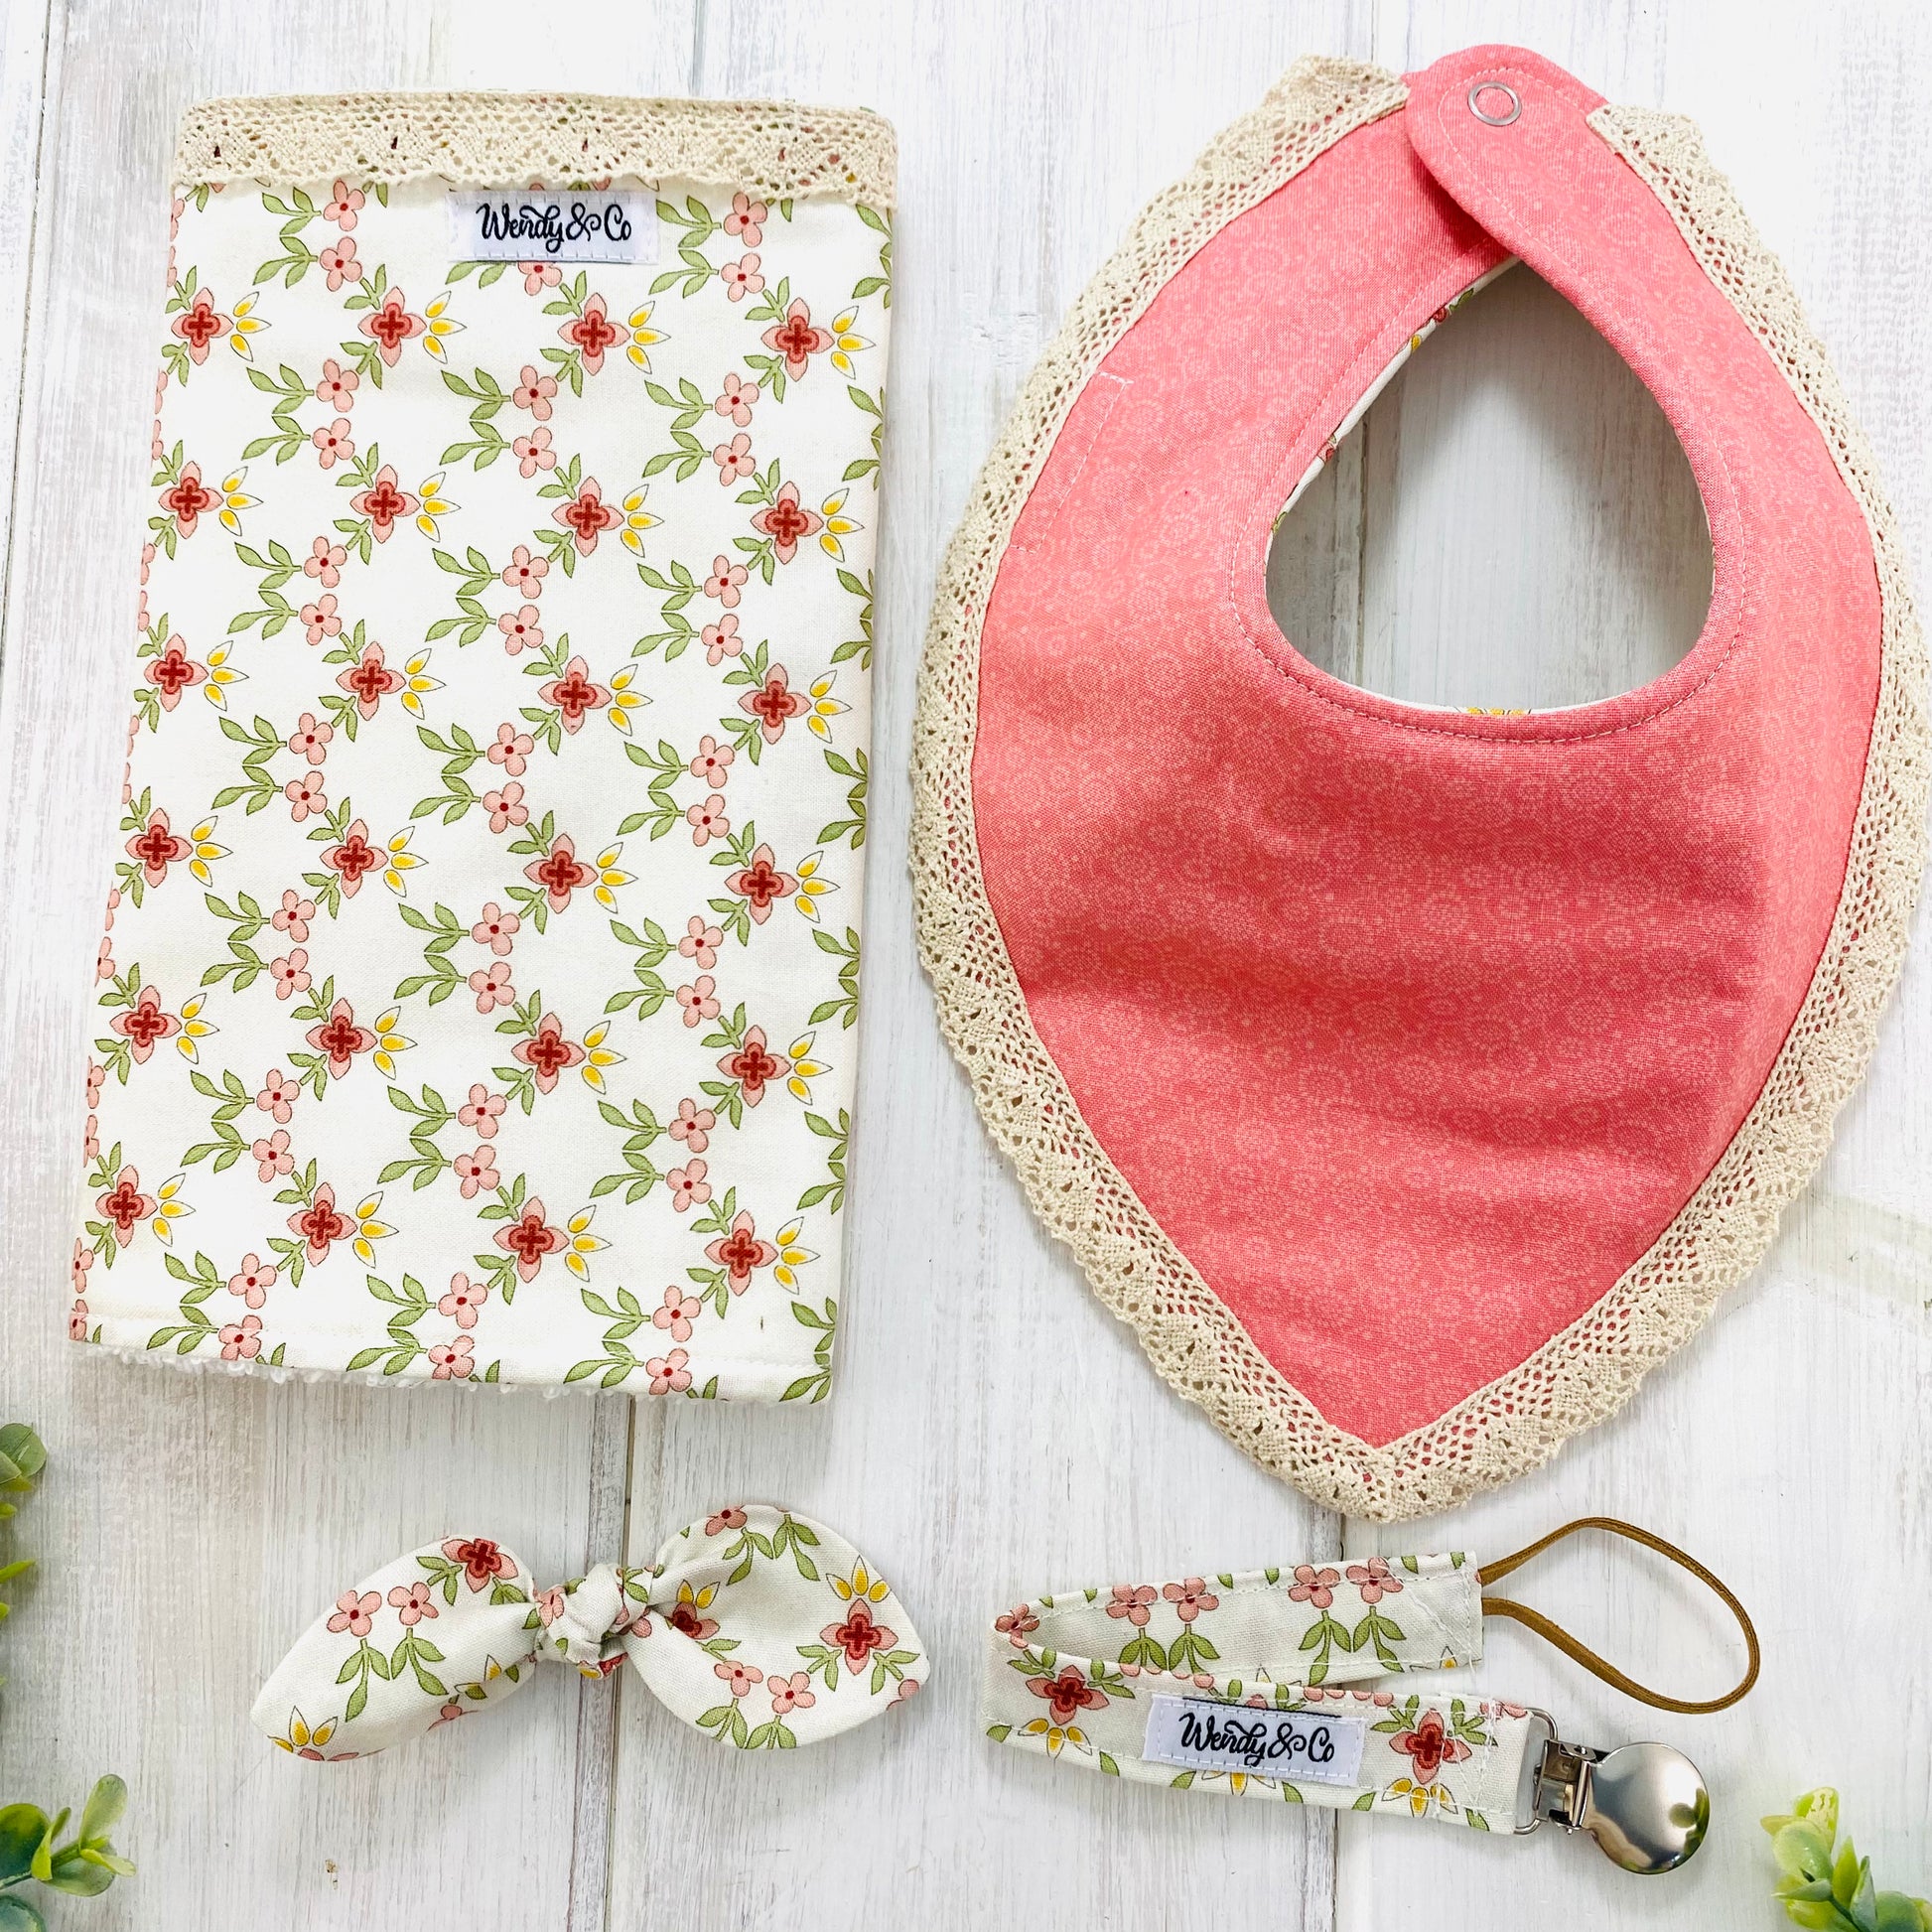 Luxury handmade baby gift set with vintage trim in florals and pinks.